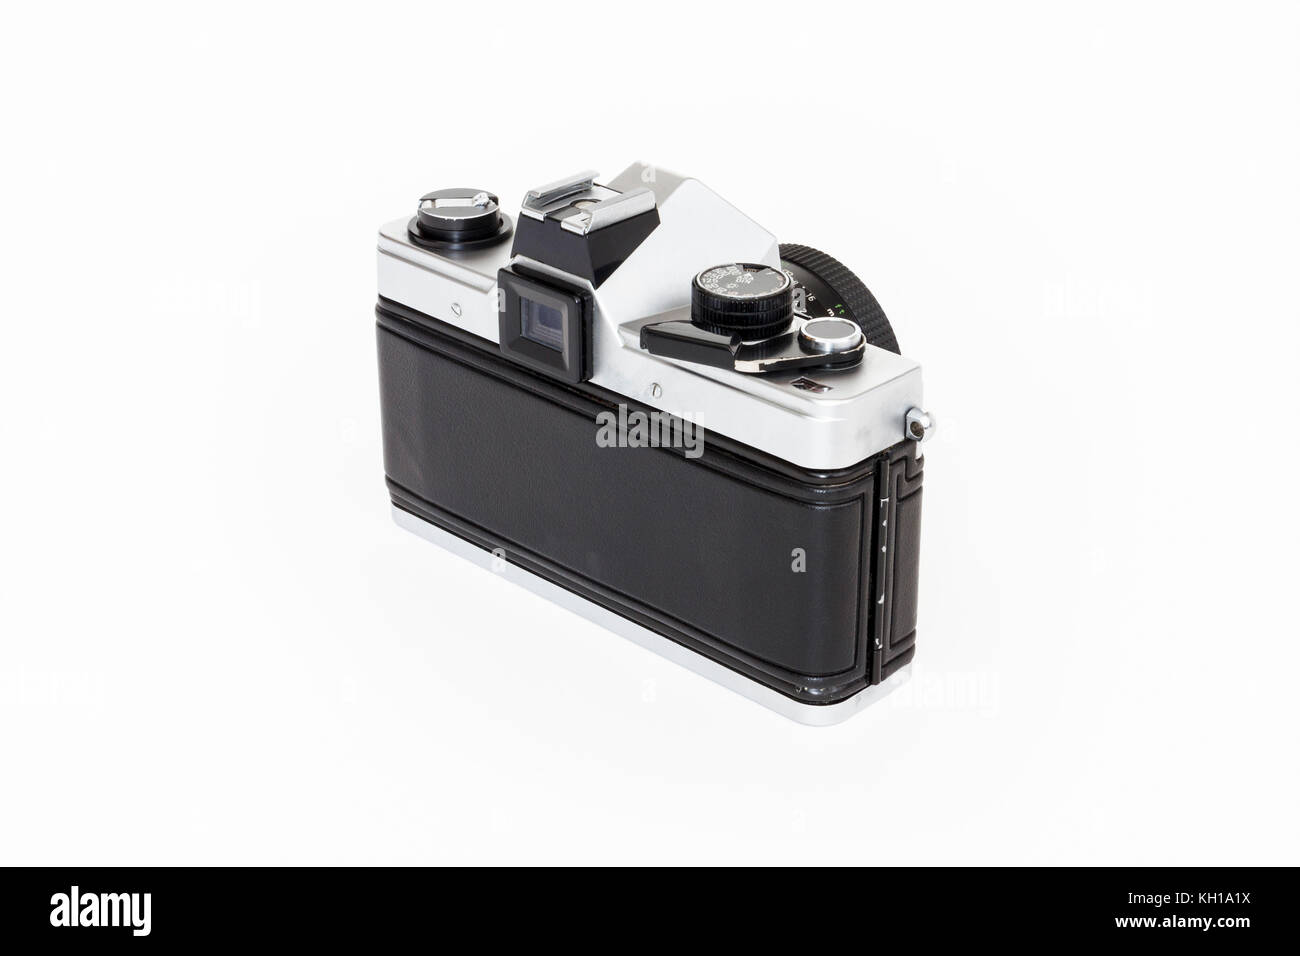 Praktica Super TL1000 35mm roll film SLR camera with 50mm Pentacon lens, 1980s, isolated against a white background Stock Photo